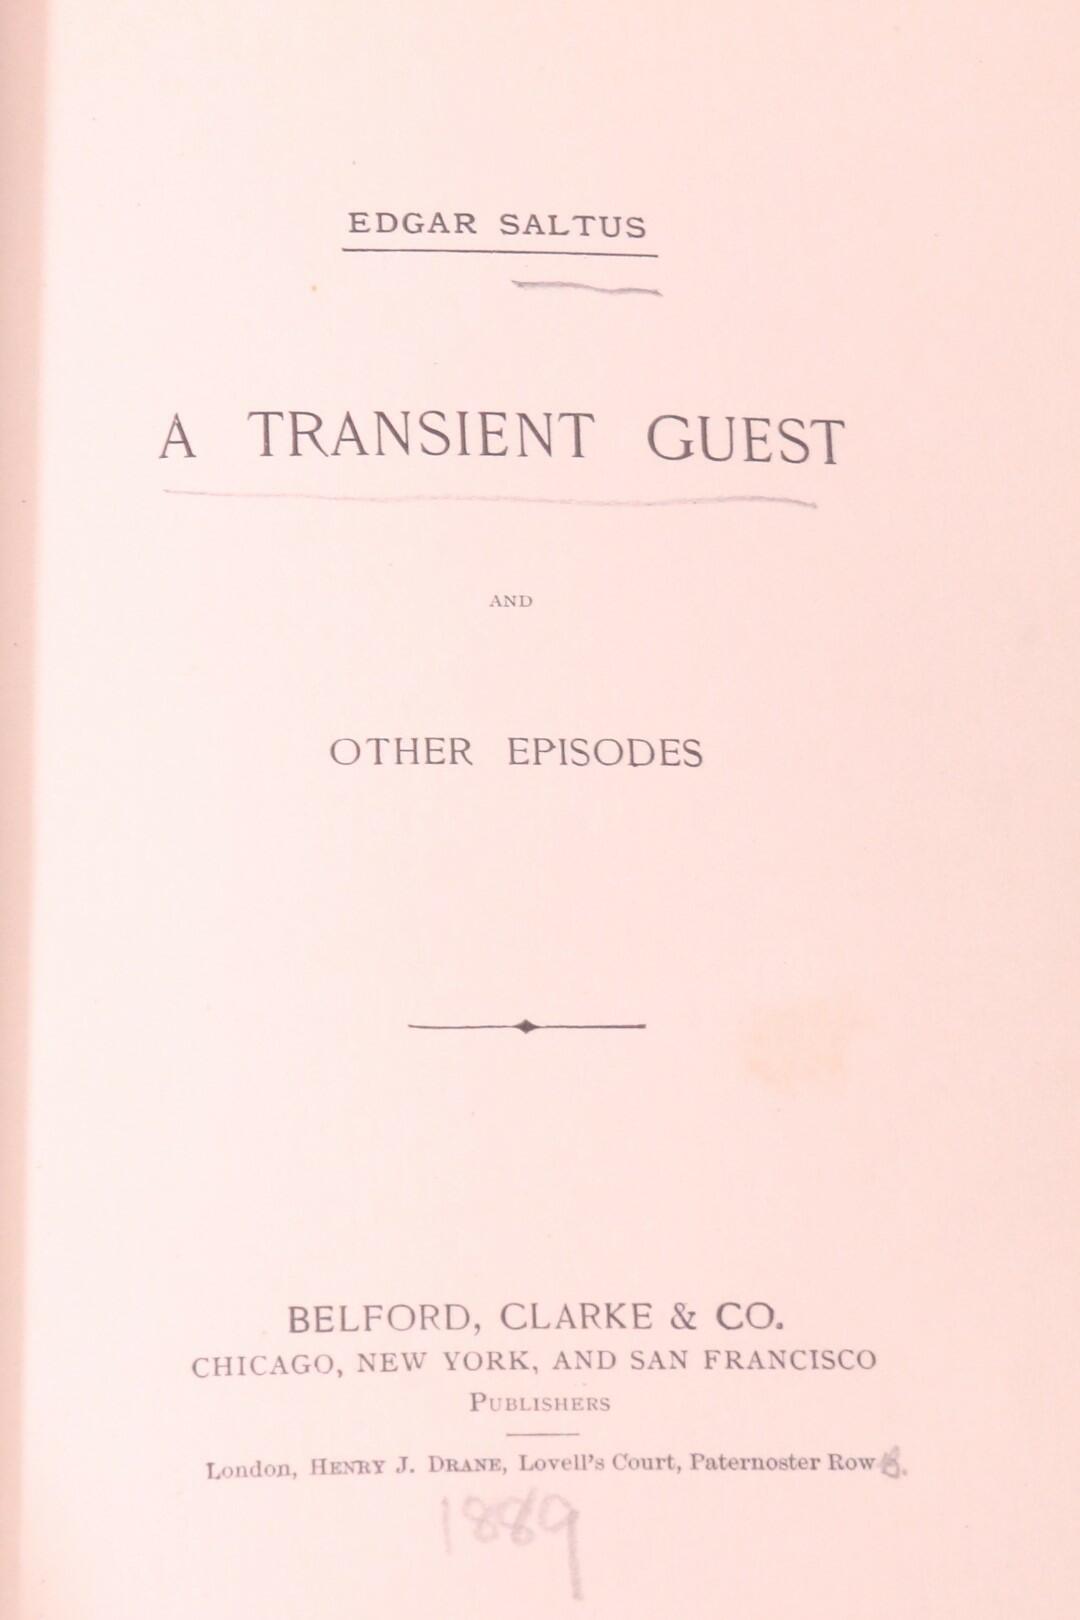 Edgar Saltus - A Transient Guest w/ The Pace that Kills - Bedford, Clarke, 1888-1889, First Edition.